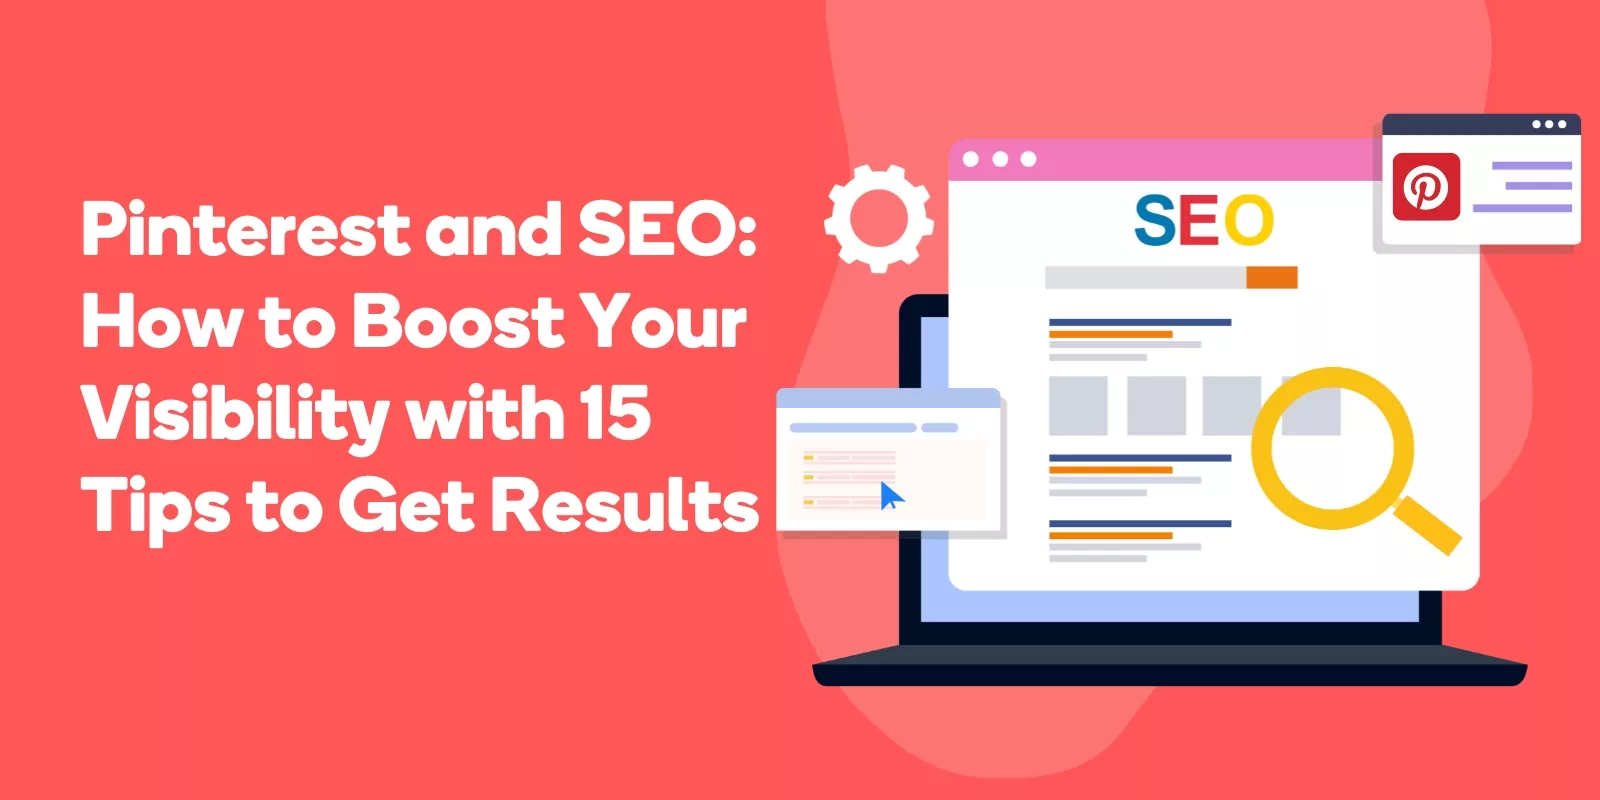 Pinterest and SEO How to Boost Your Visibility with 15 Tips to Get Results